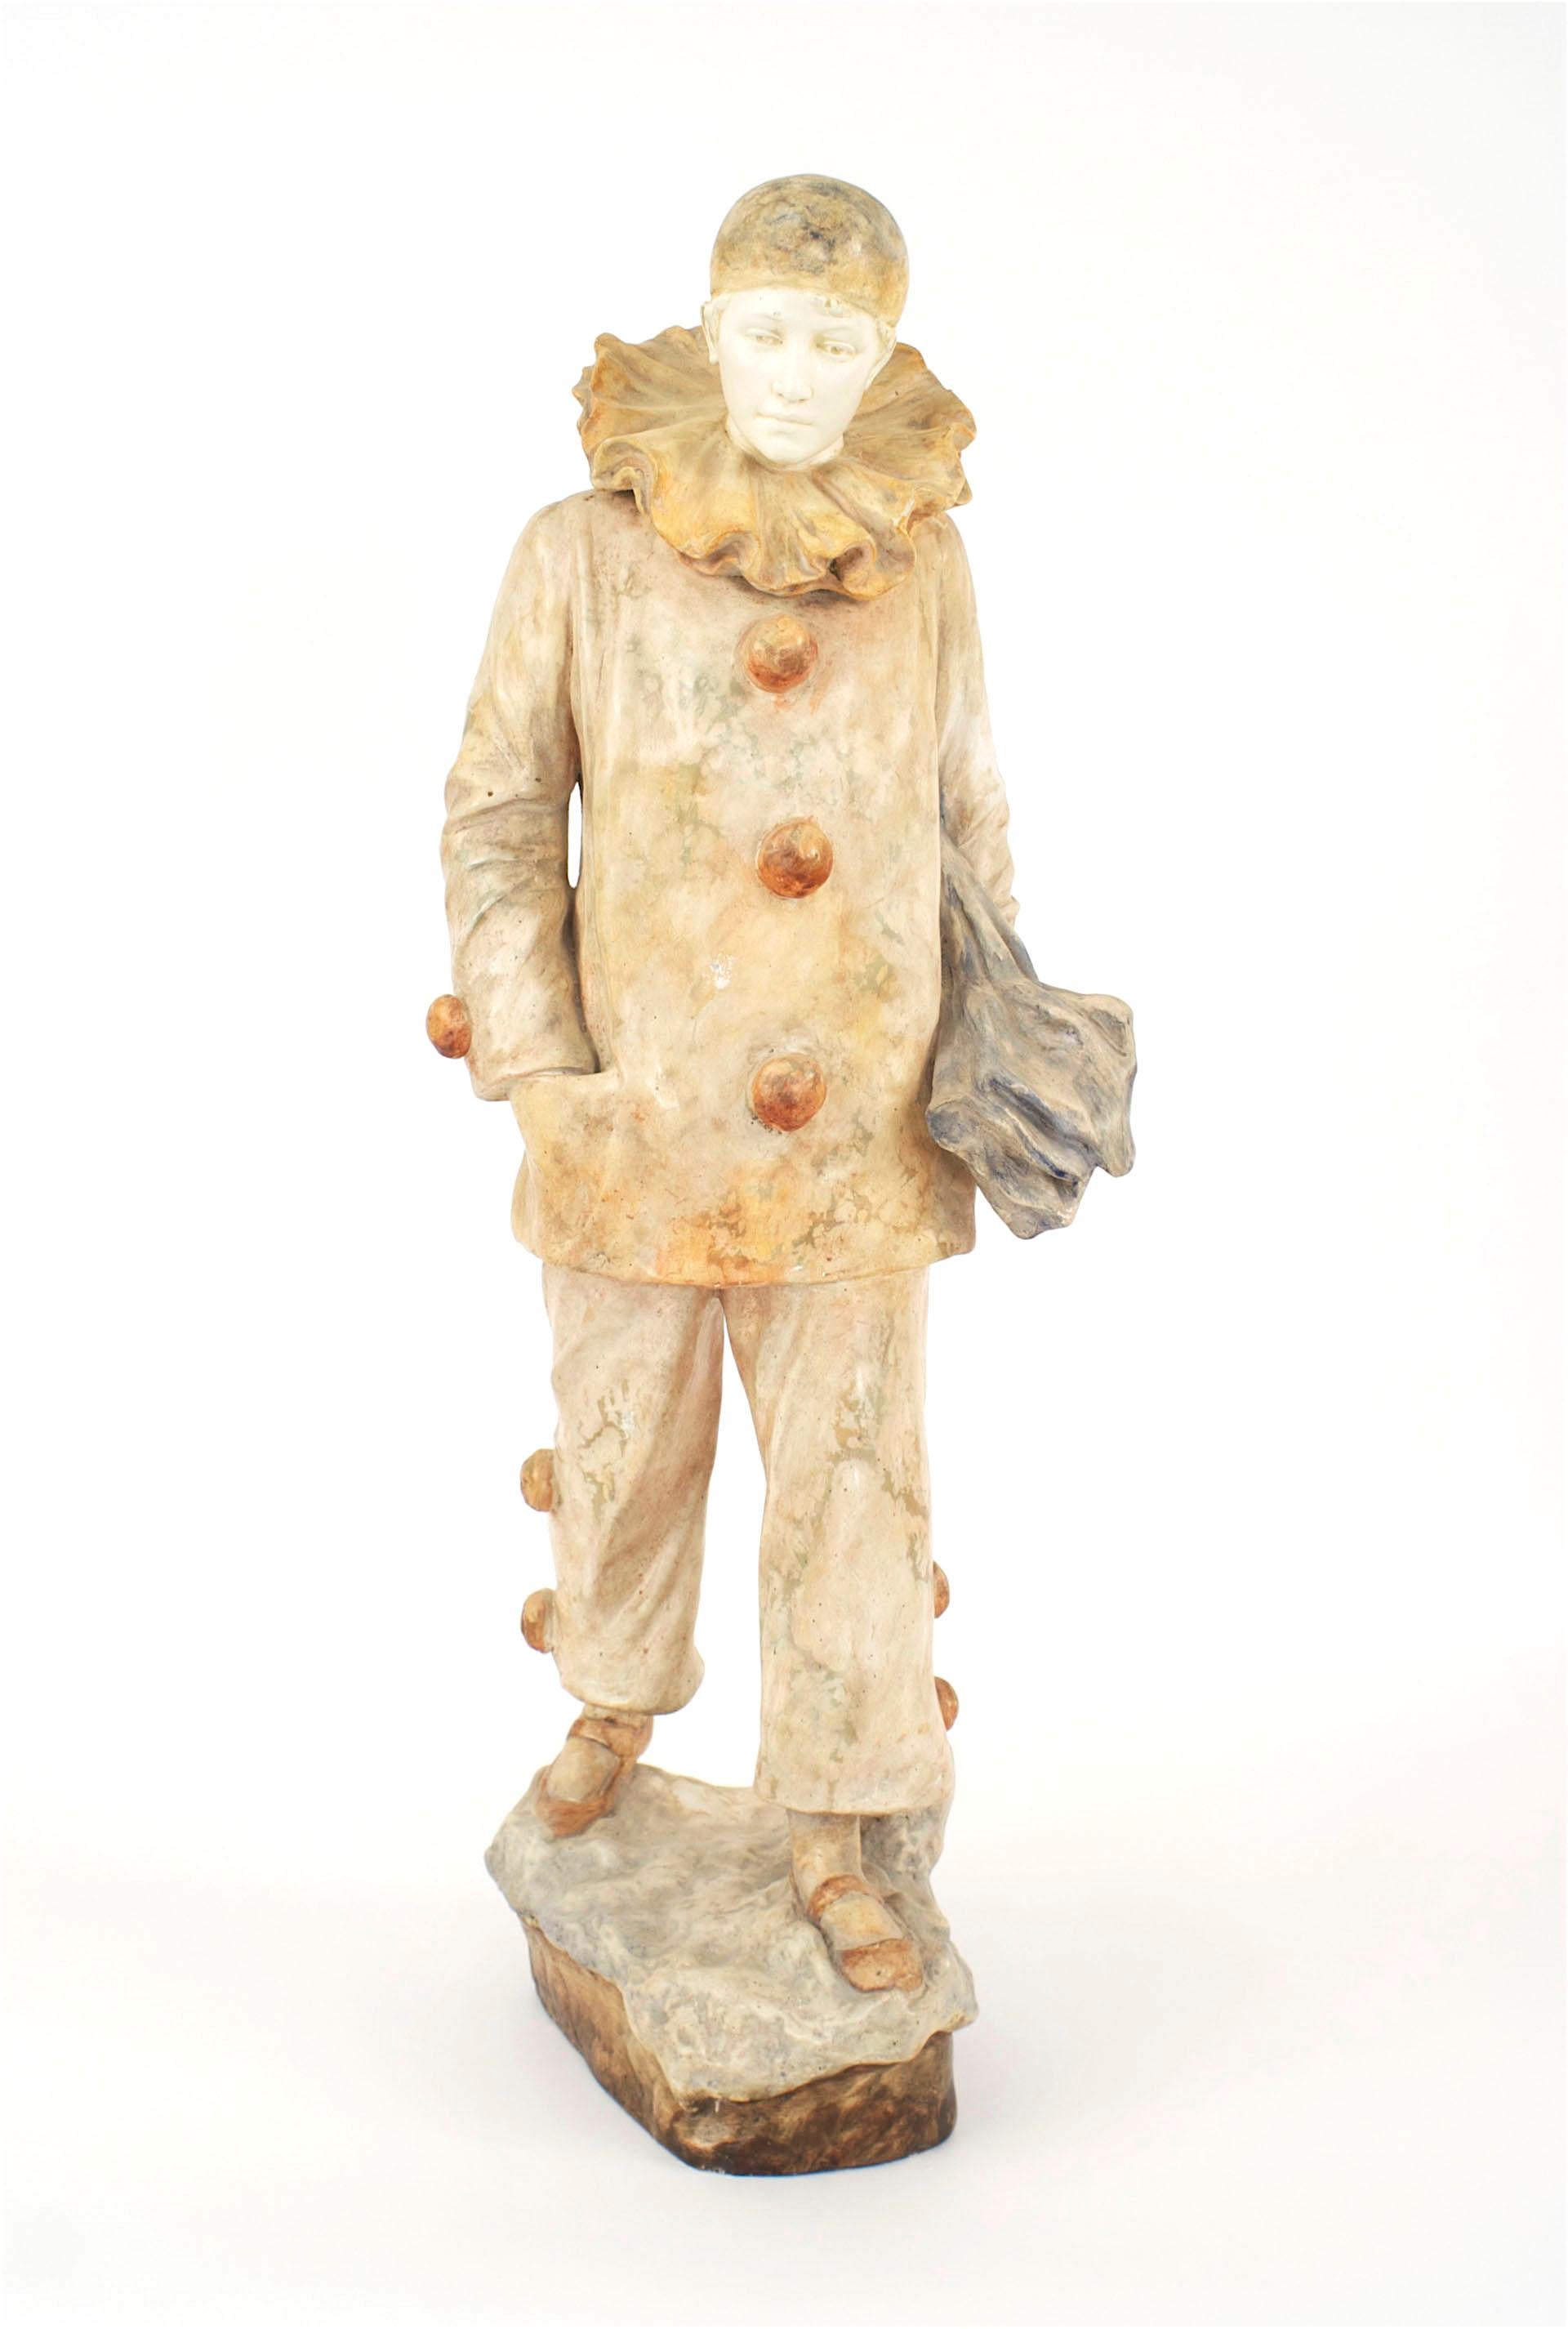 French Victorian terra-cotta figure of a harlequin holding an umbrella with a white face and wearing a cap & clown outfit with large buttons (signed: HANISOFF, with additional marking)
